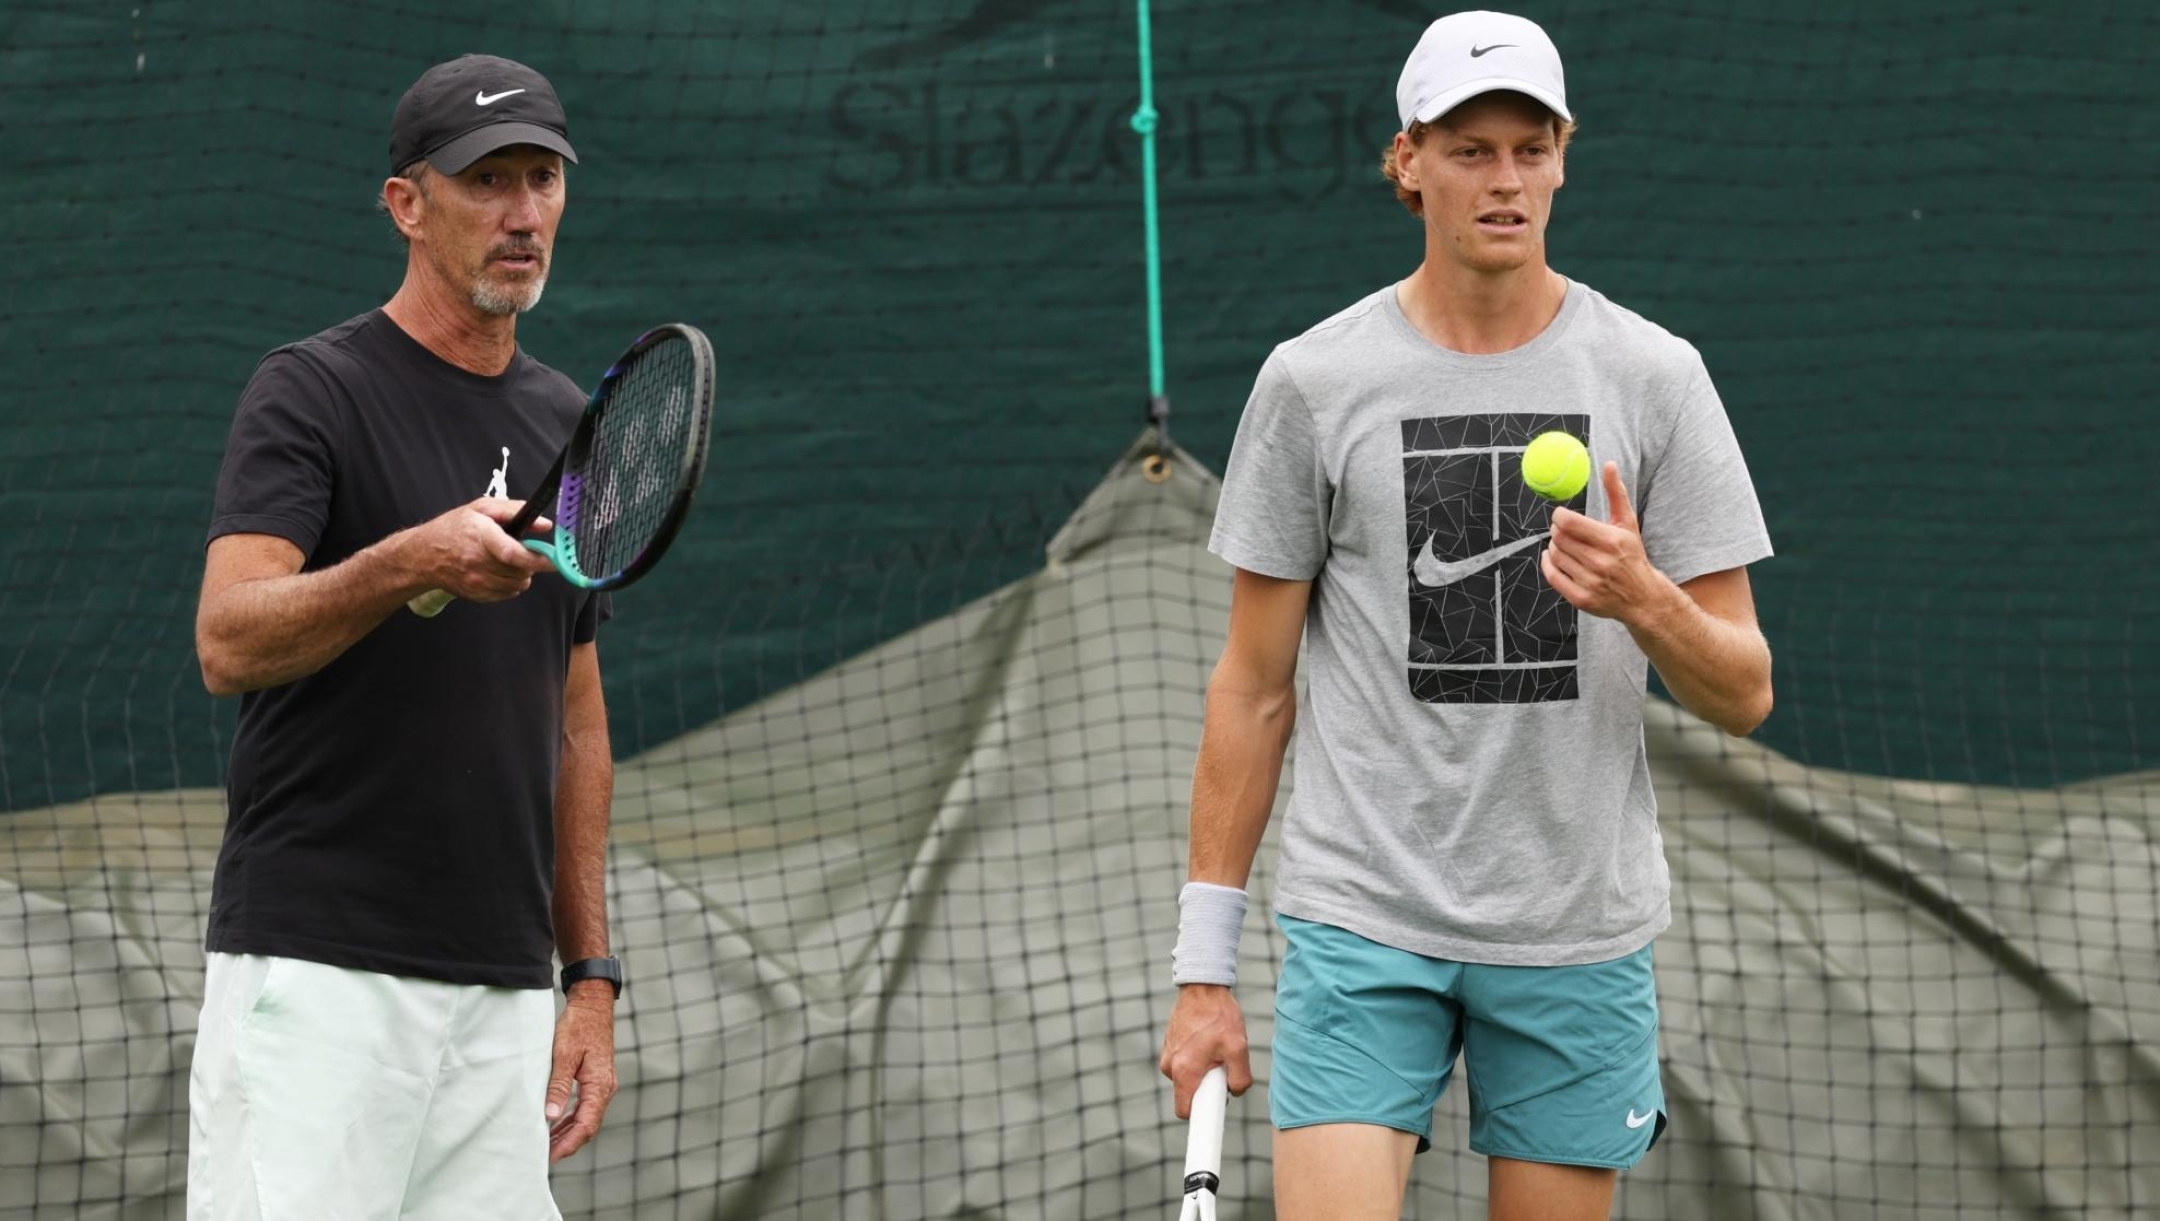 LONDON, ENGLAND - JUNE 27: Jannik Sinner of Italy talks with Coach, Darren Cahill during a practice session ahead of The Championships Wimbledon 2023 at All England Lawn Tennis and Croquet Club on June 27, 2023 in London, England. (Photo by Clive Brunskill/Getty Images)